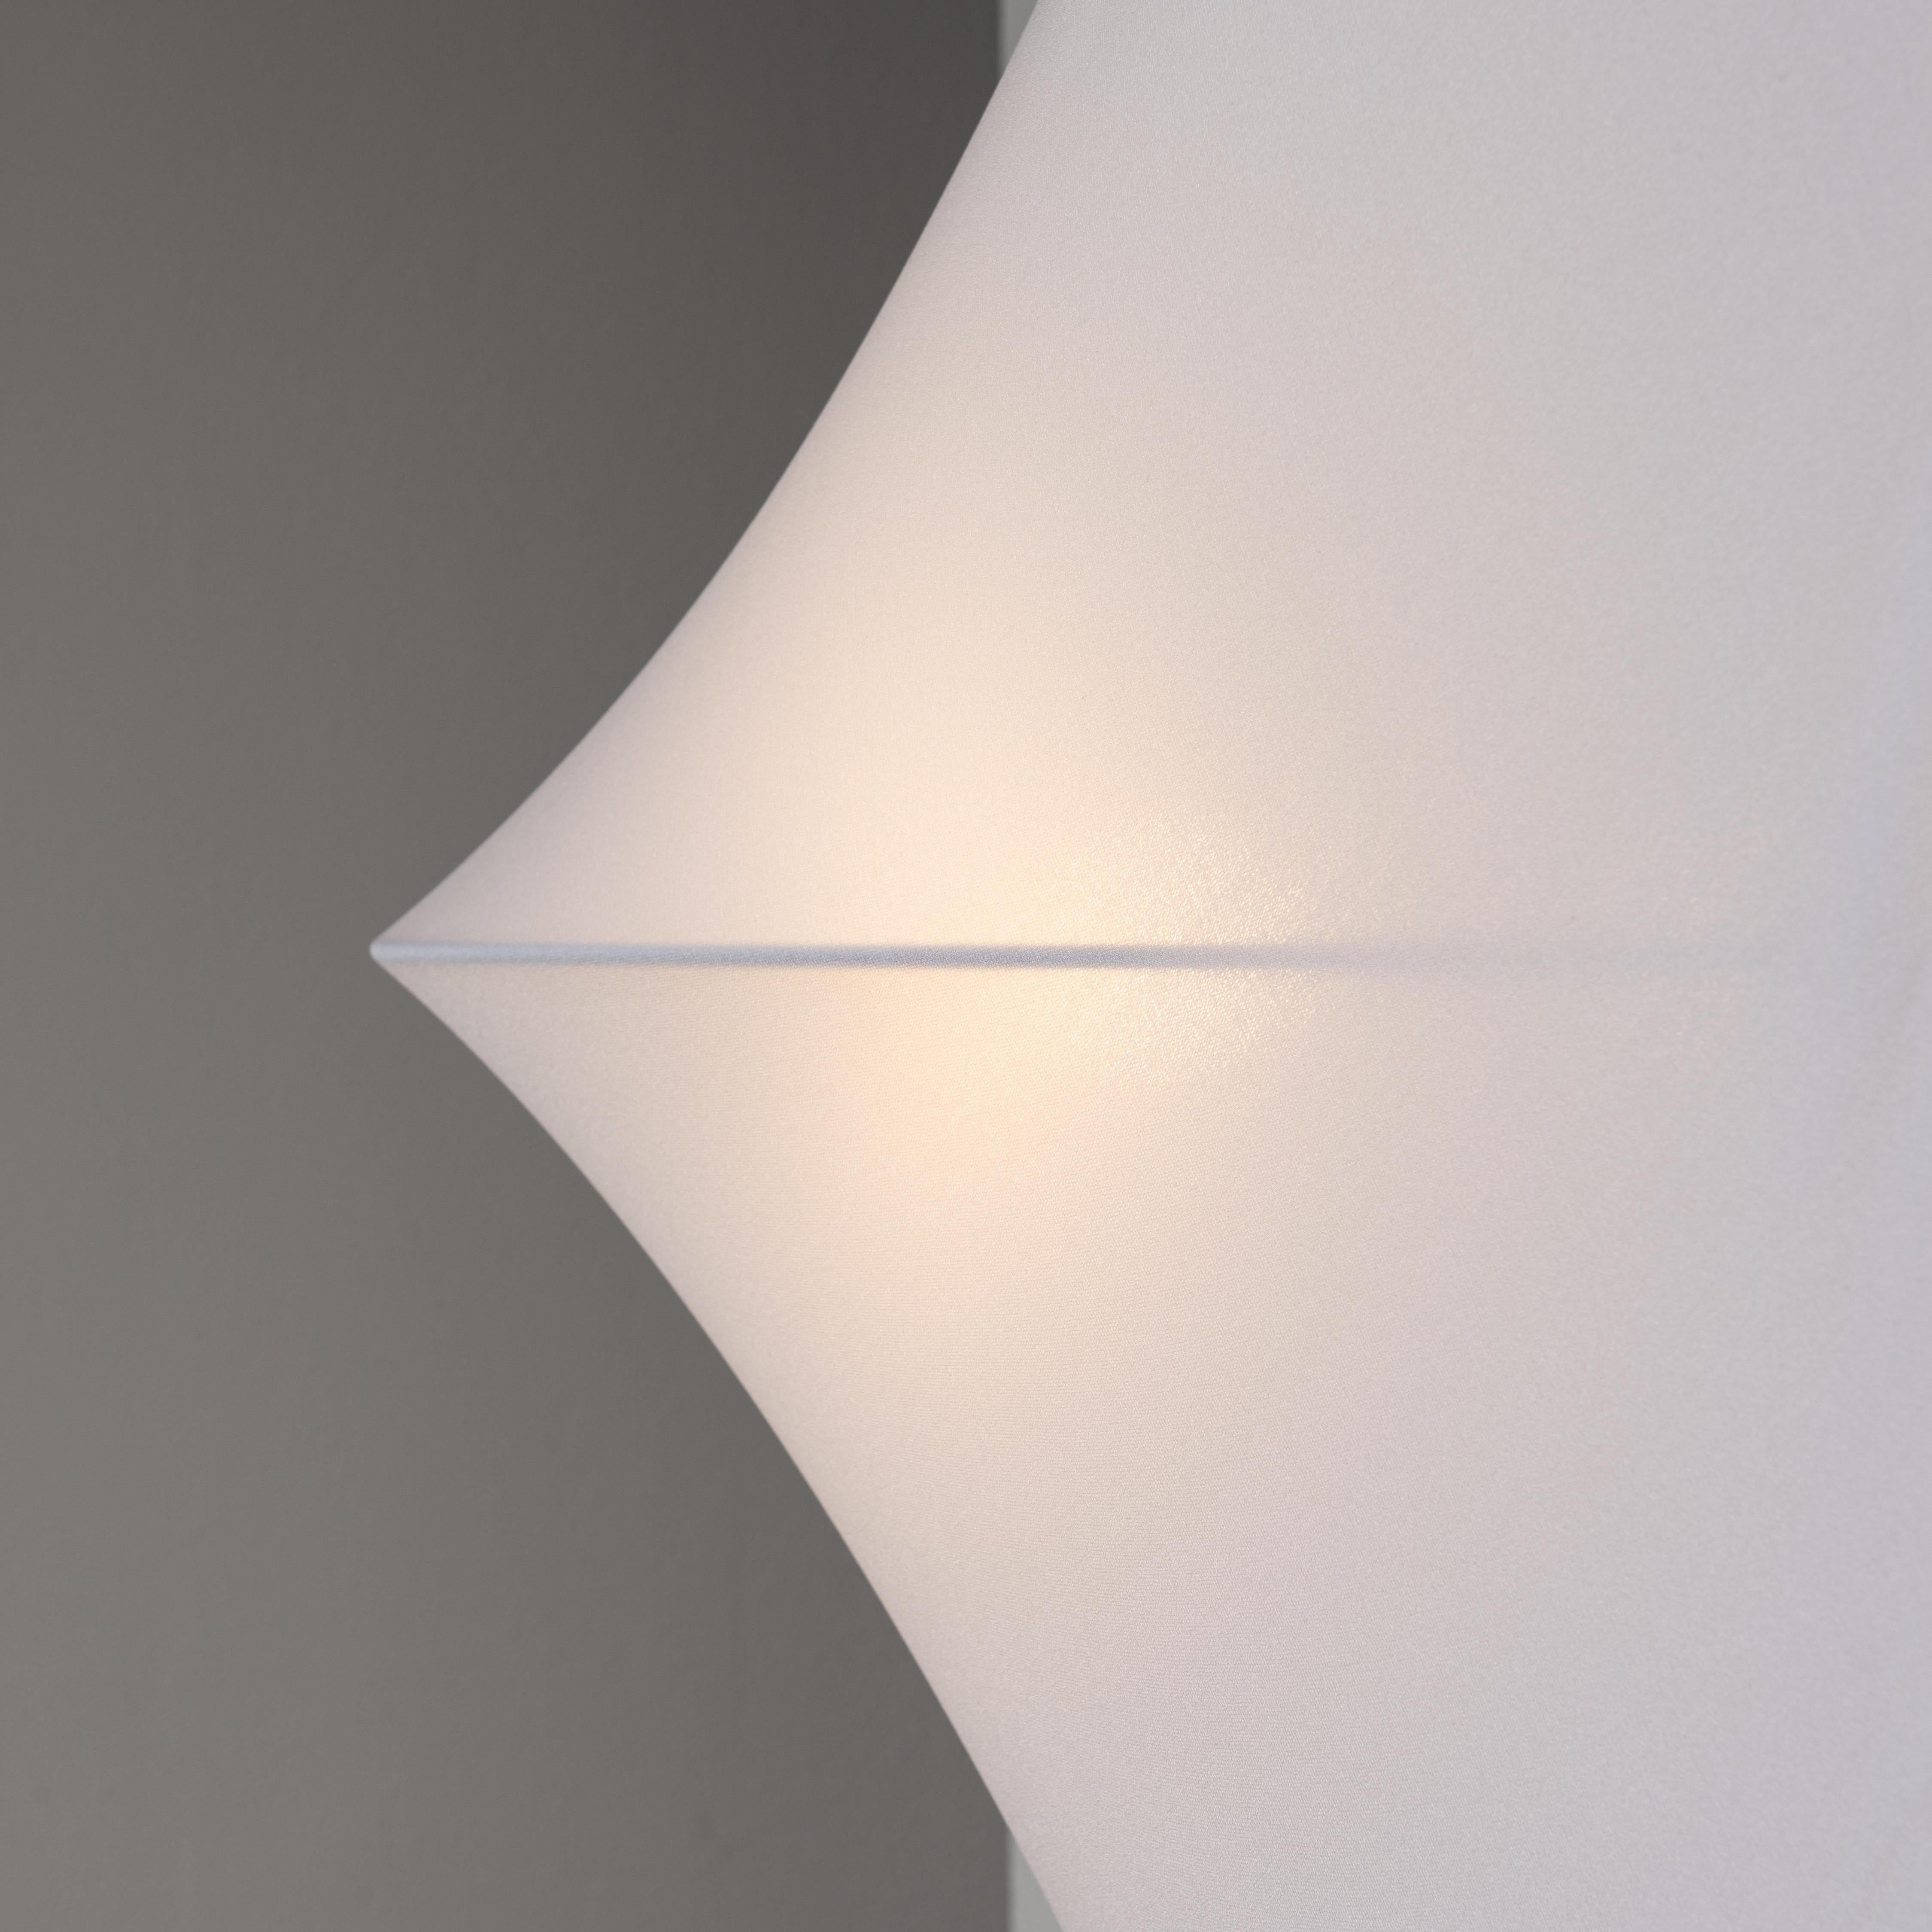 Sanka 2 Wall Light  by Kazuhide Takahama for Sirrah. Designed and manufactured in Italy, circa the 1970s. Dead-stock from Sirrah. Triangular plastic frame and stretch fabric cloth diffuser. This model variation can be mounted as a sconce, or corner